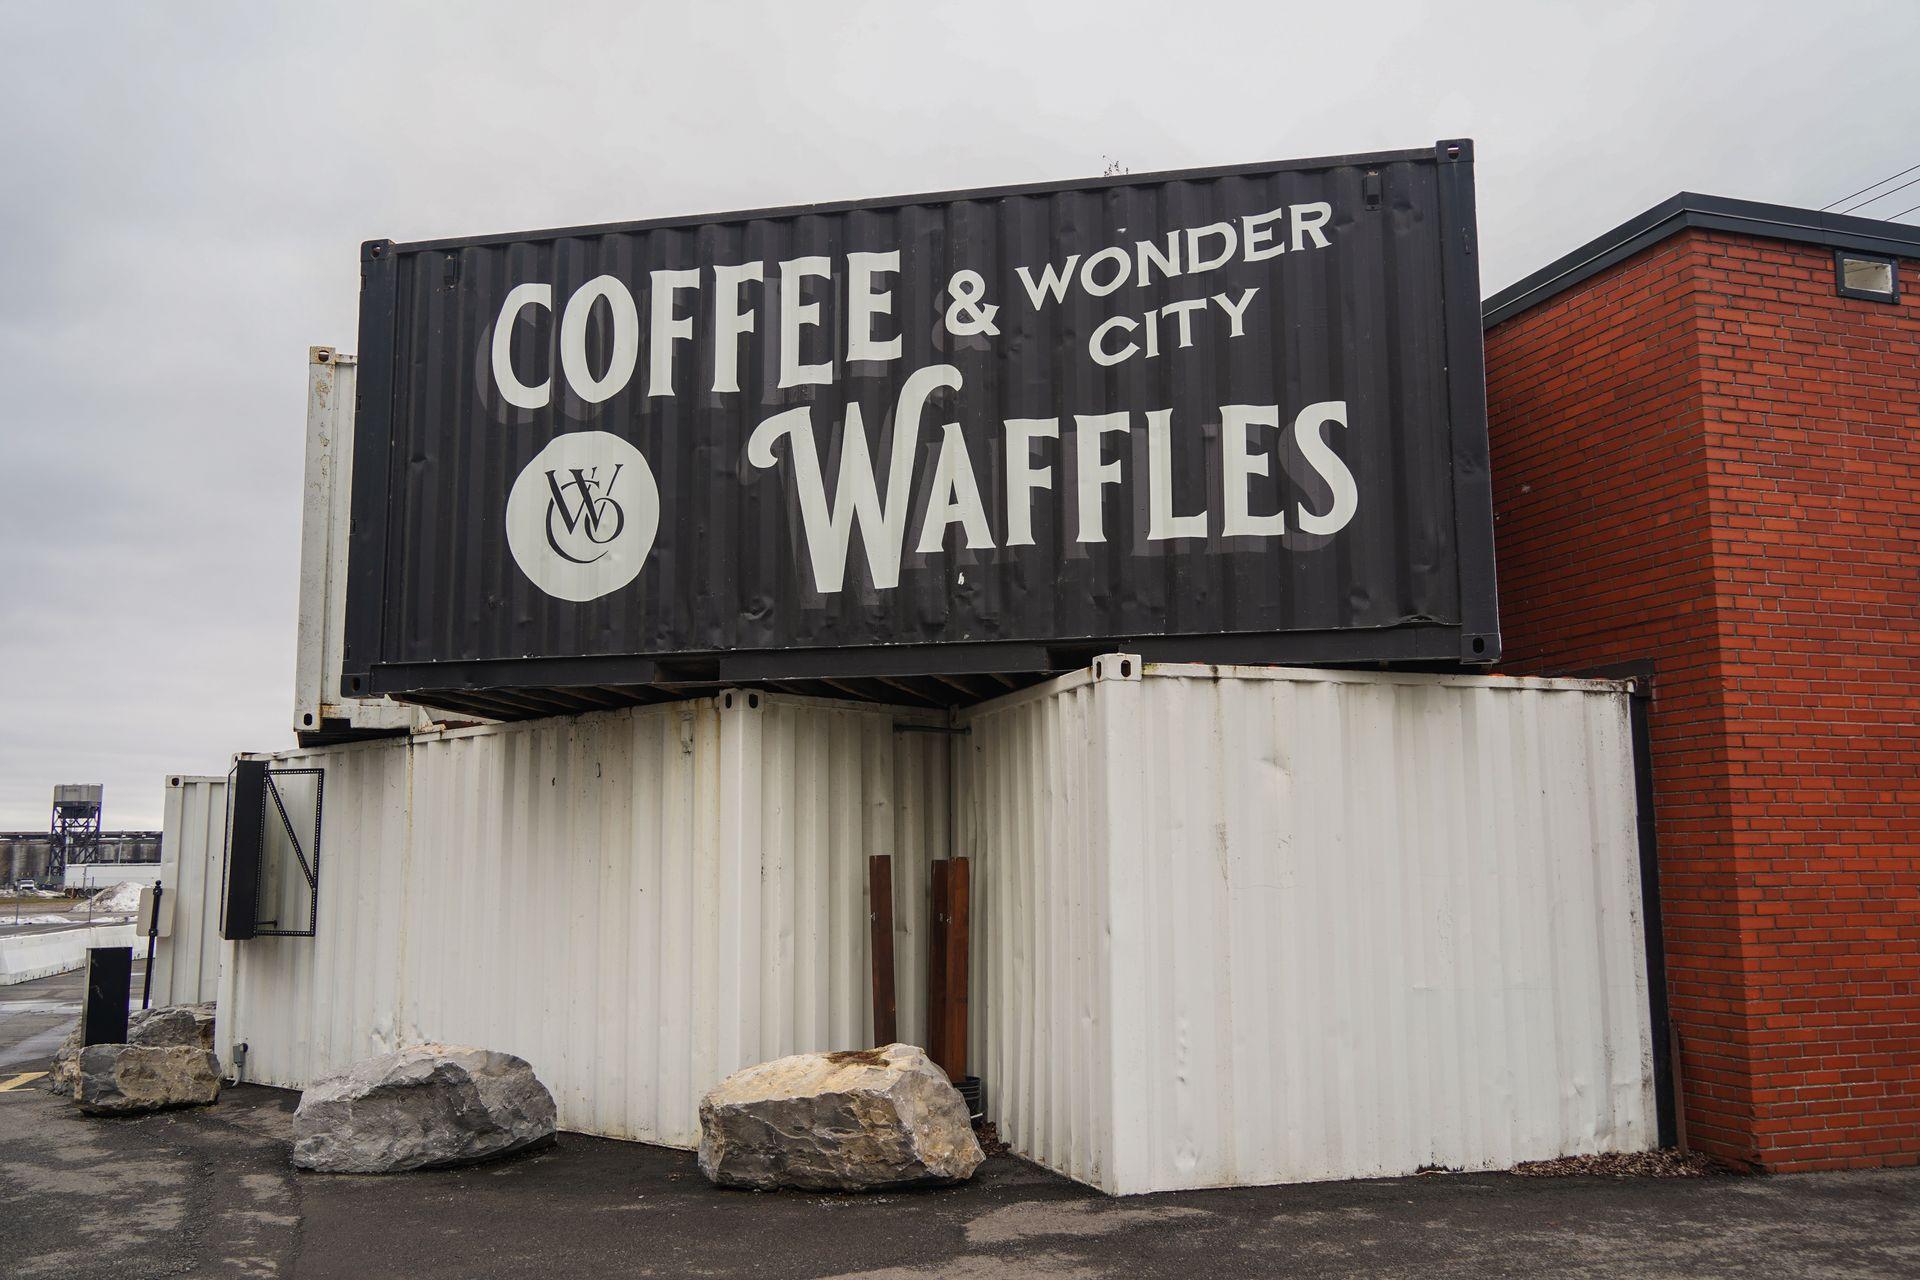 A black shipping container stacked on top of white shipping containers. The black one reads 'Coffee & Waffles Wonder City'